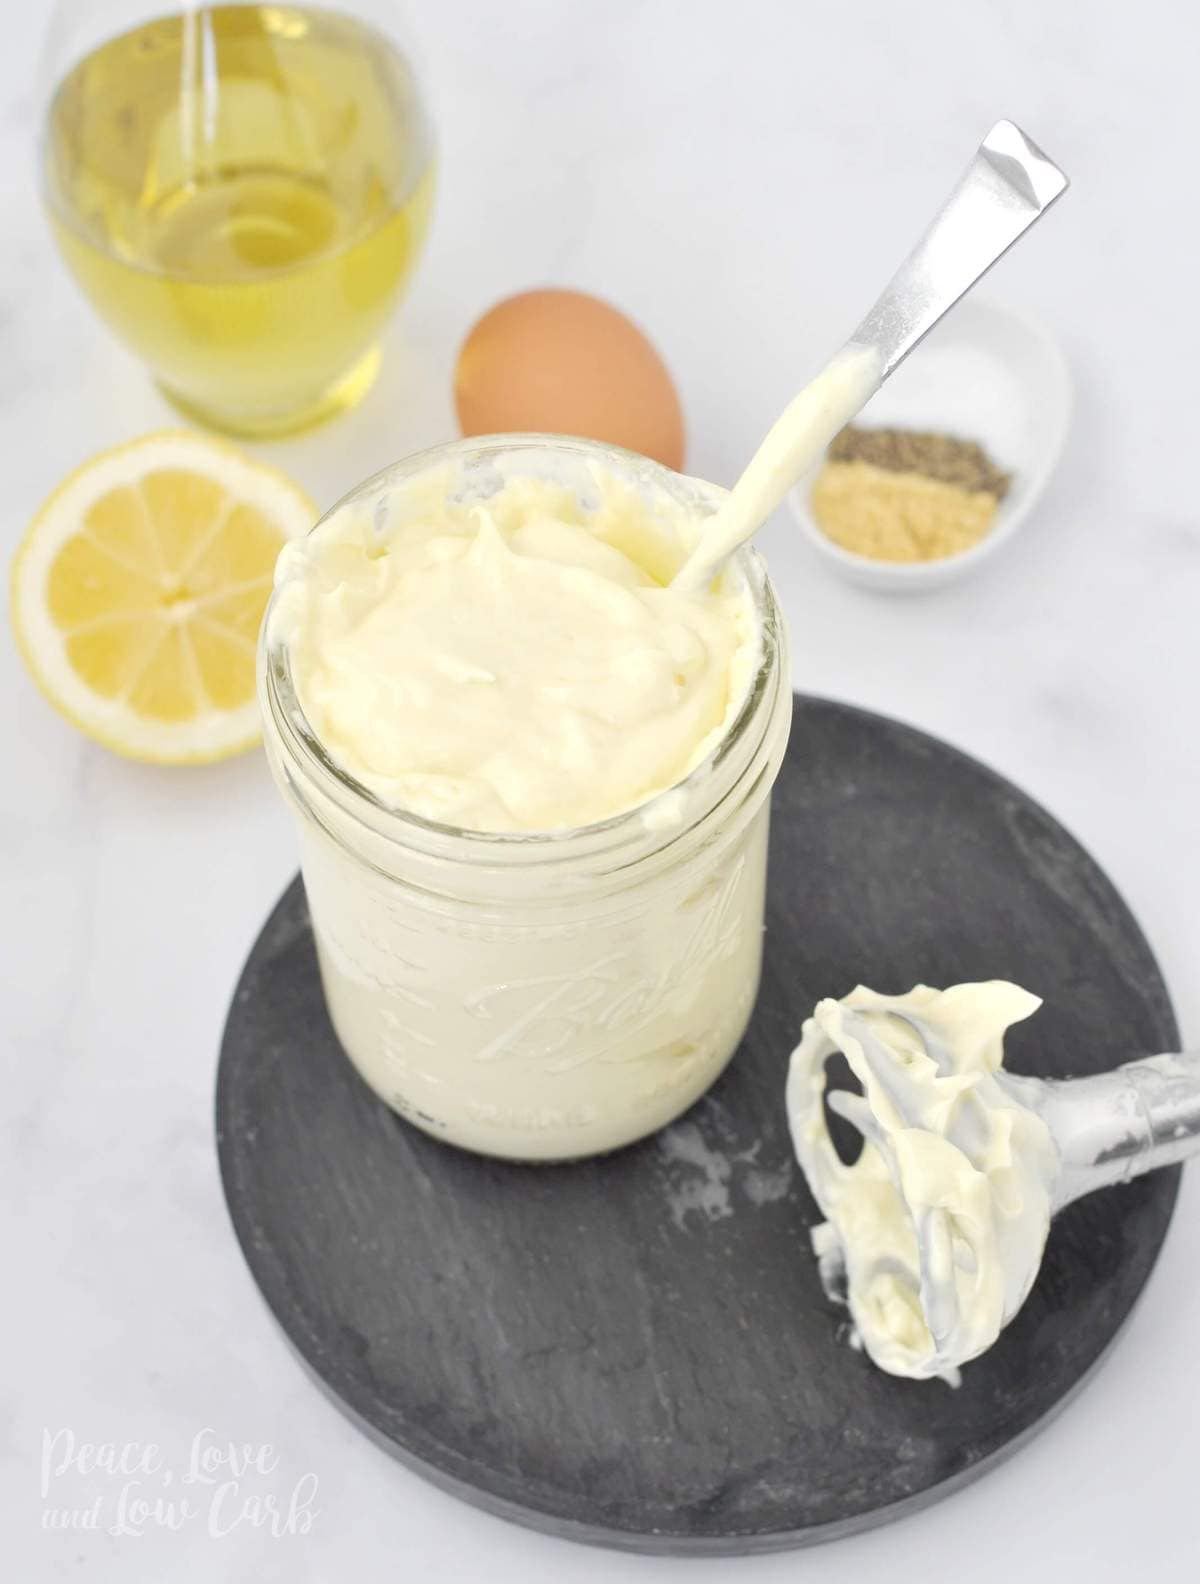 Foolproof 2 Minute Avocado Oil Mayo - Paleo, Low Carb | Peace Love and Low Carb